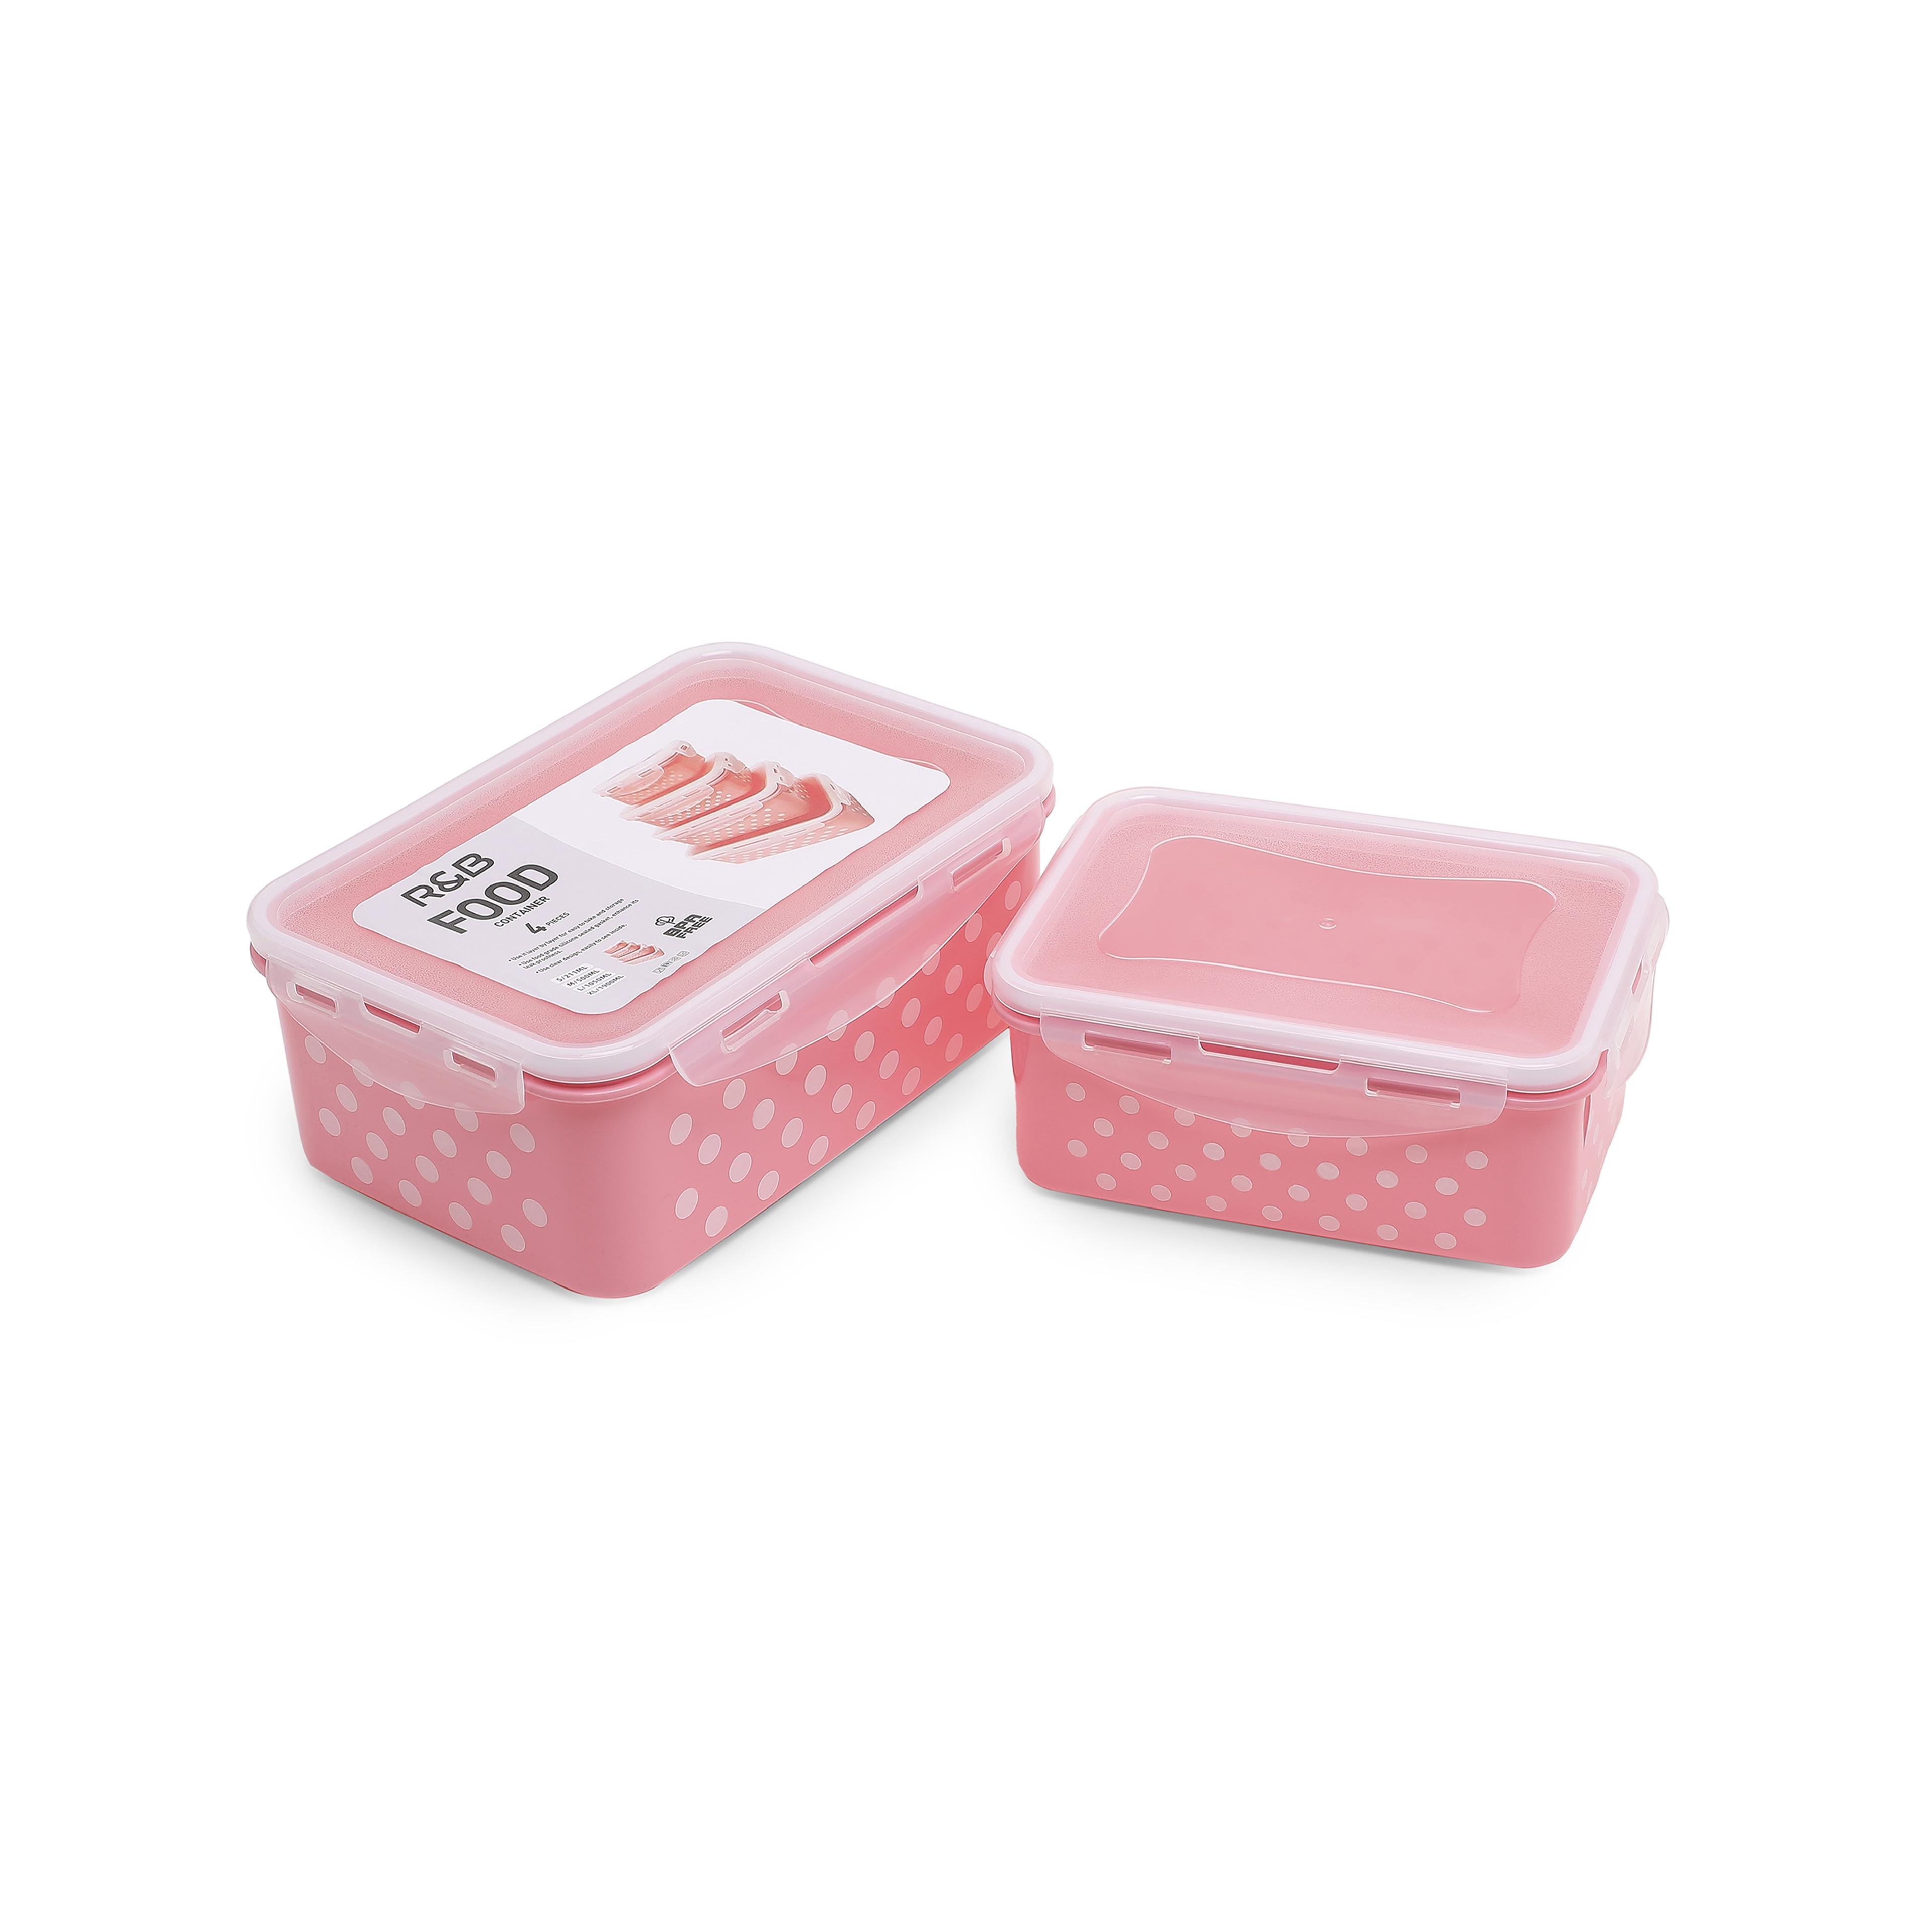 Pack of 4 Storage Containers